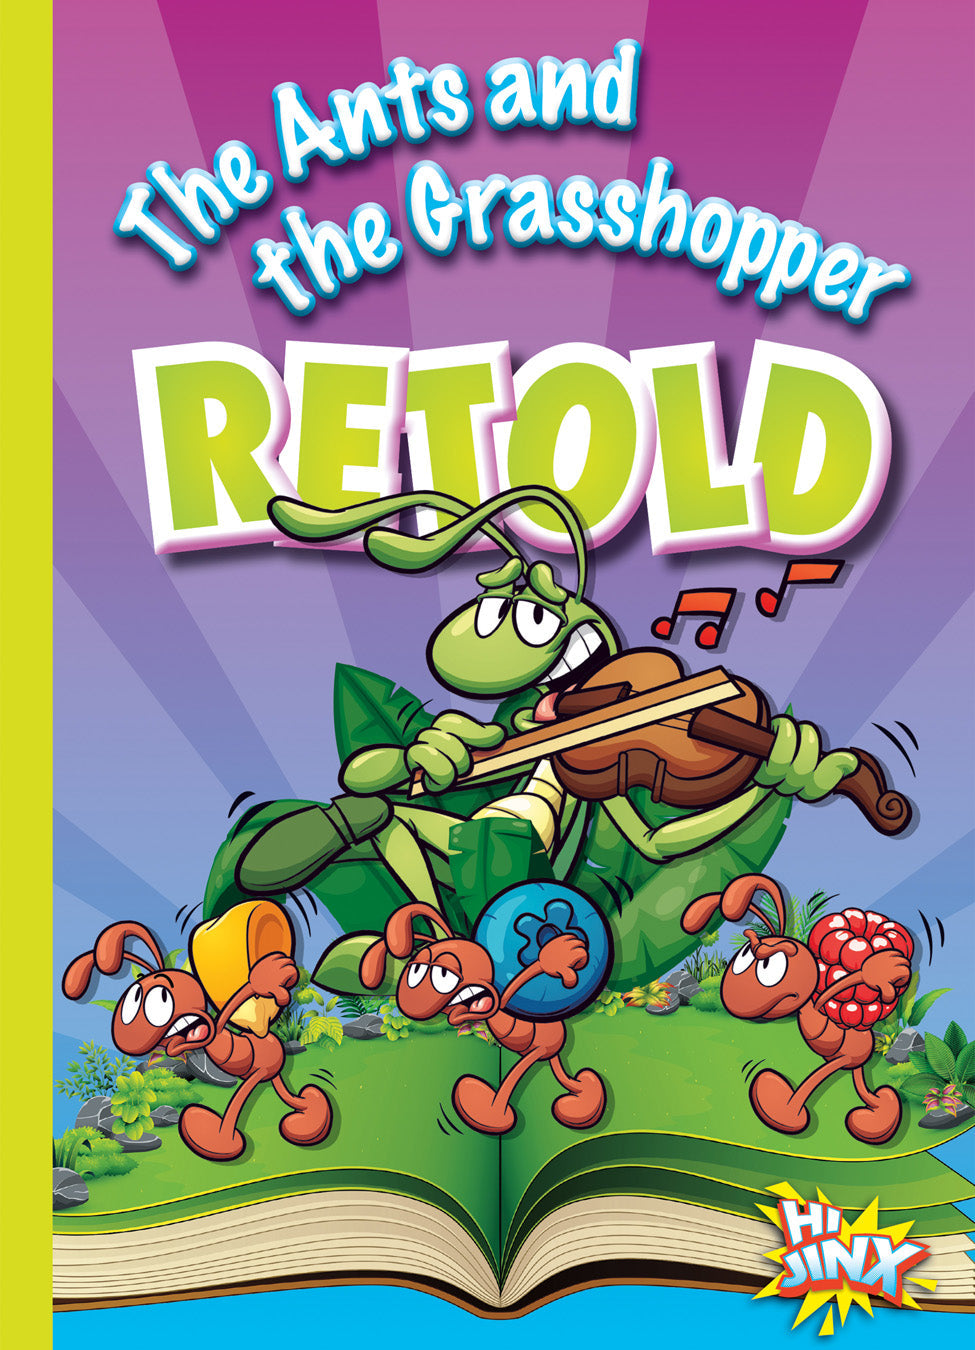 Aesop's Funny Fables: The Ants and the Grasshopper Retold